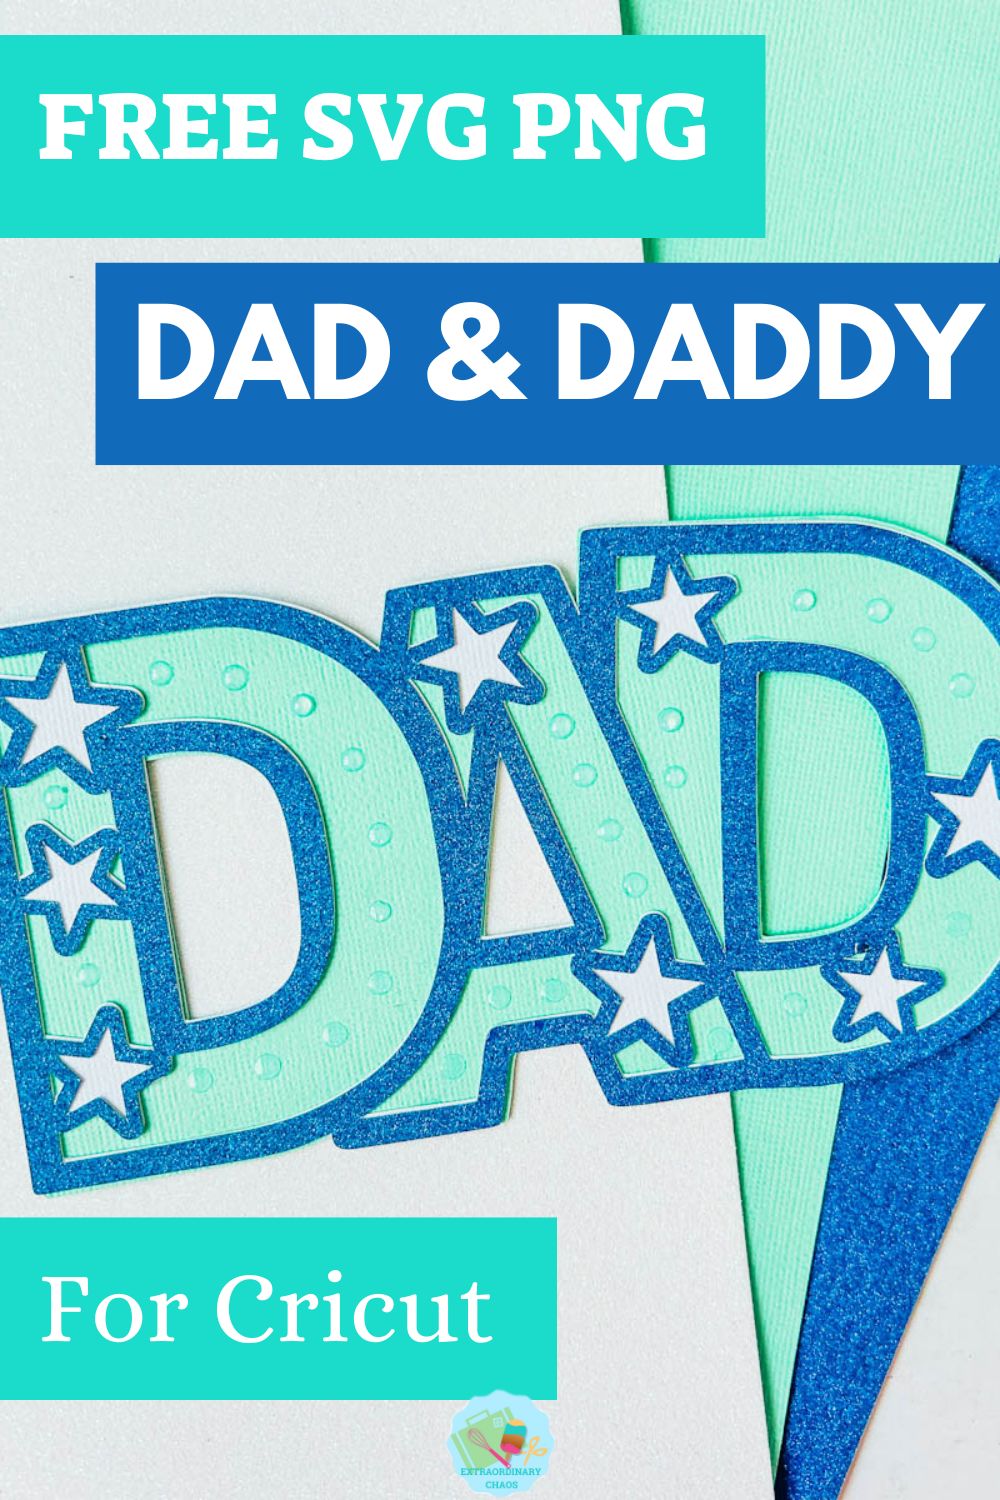 Free SVG PNG LAYERED DAD AND DADDY for Cricut and Silhouette card making, sublimation, cake toppers and scrapbooking